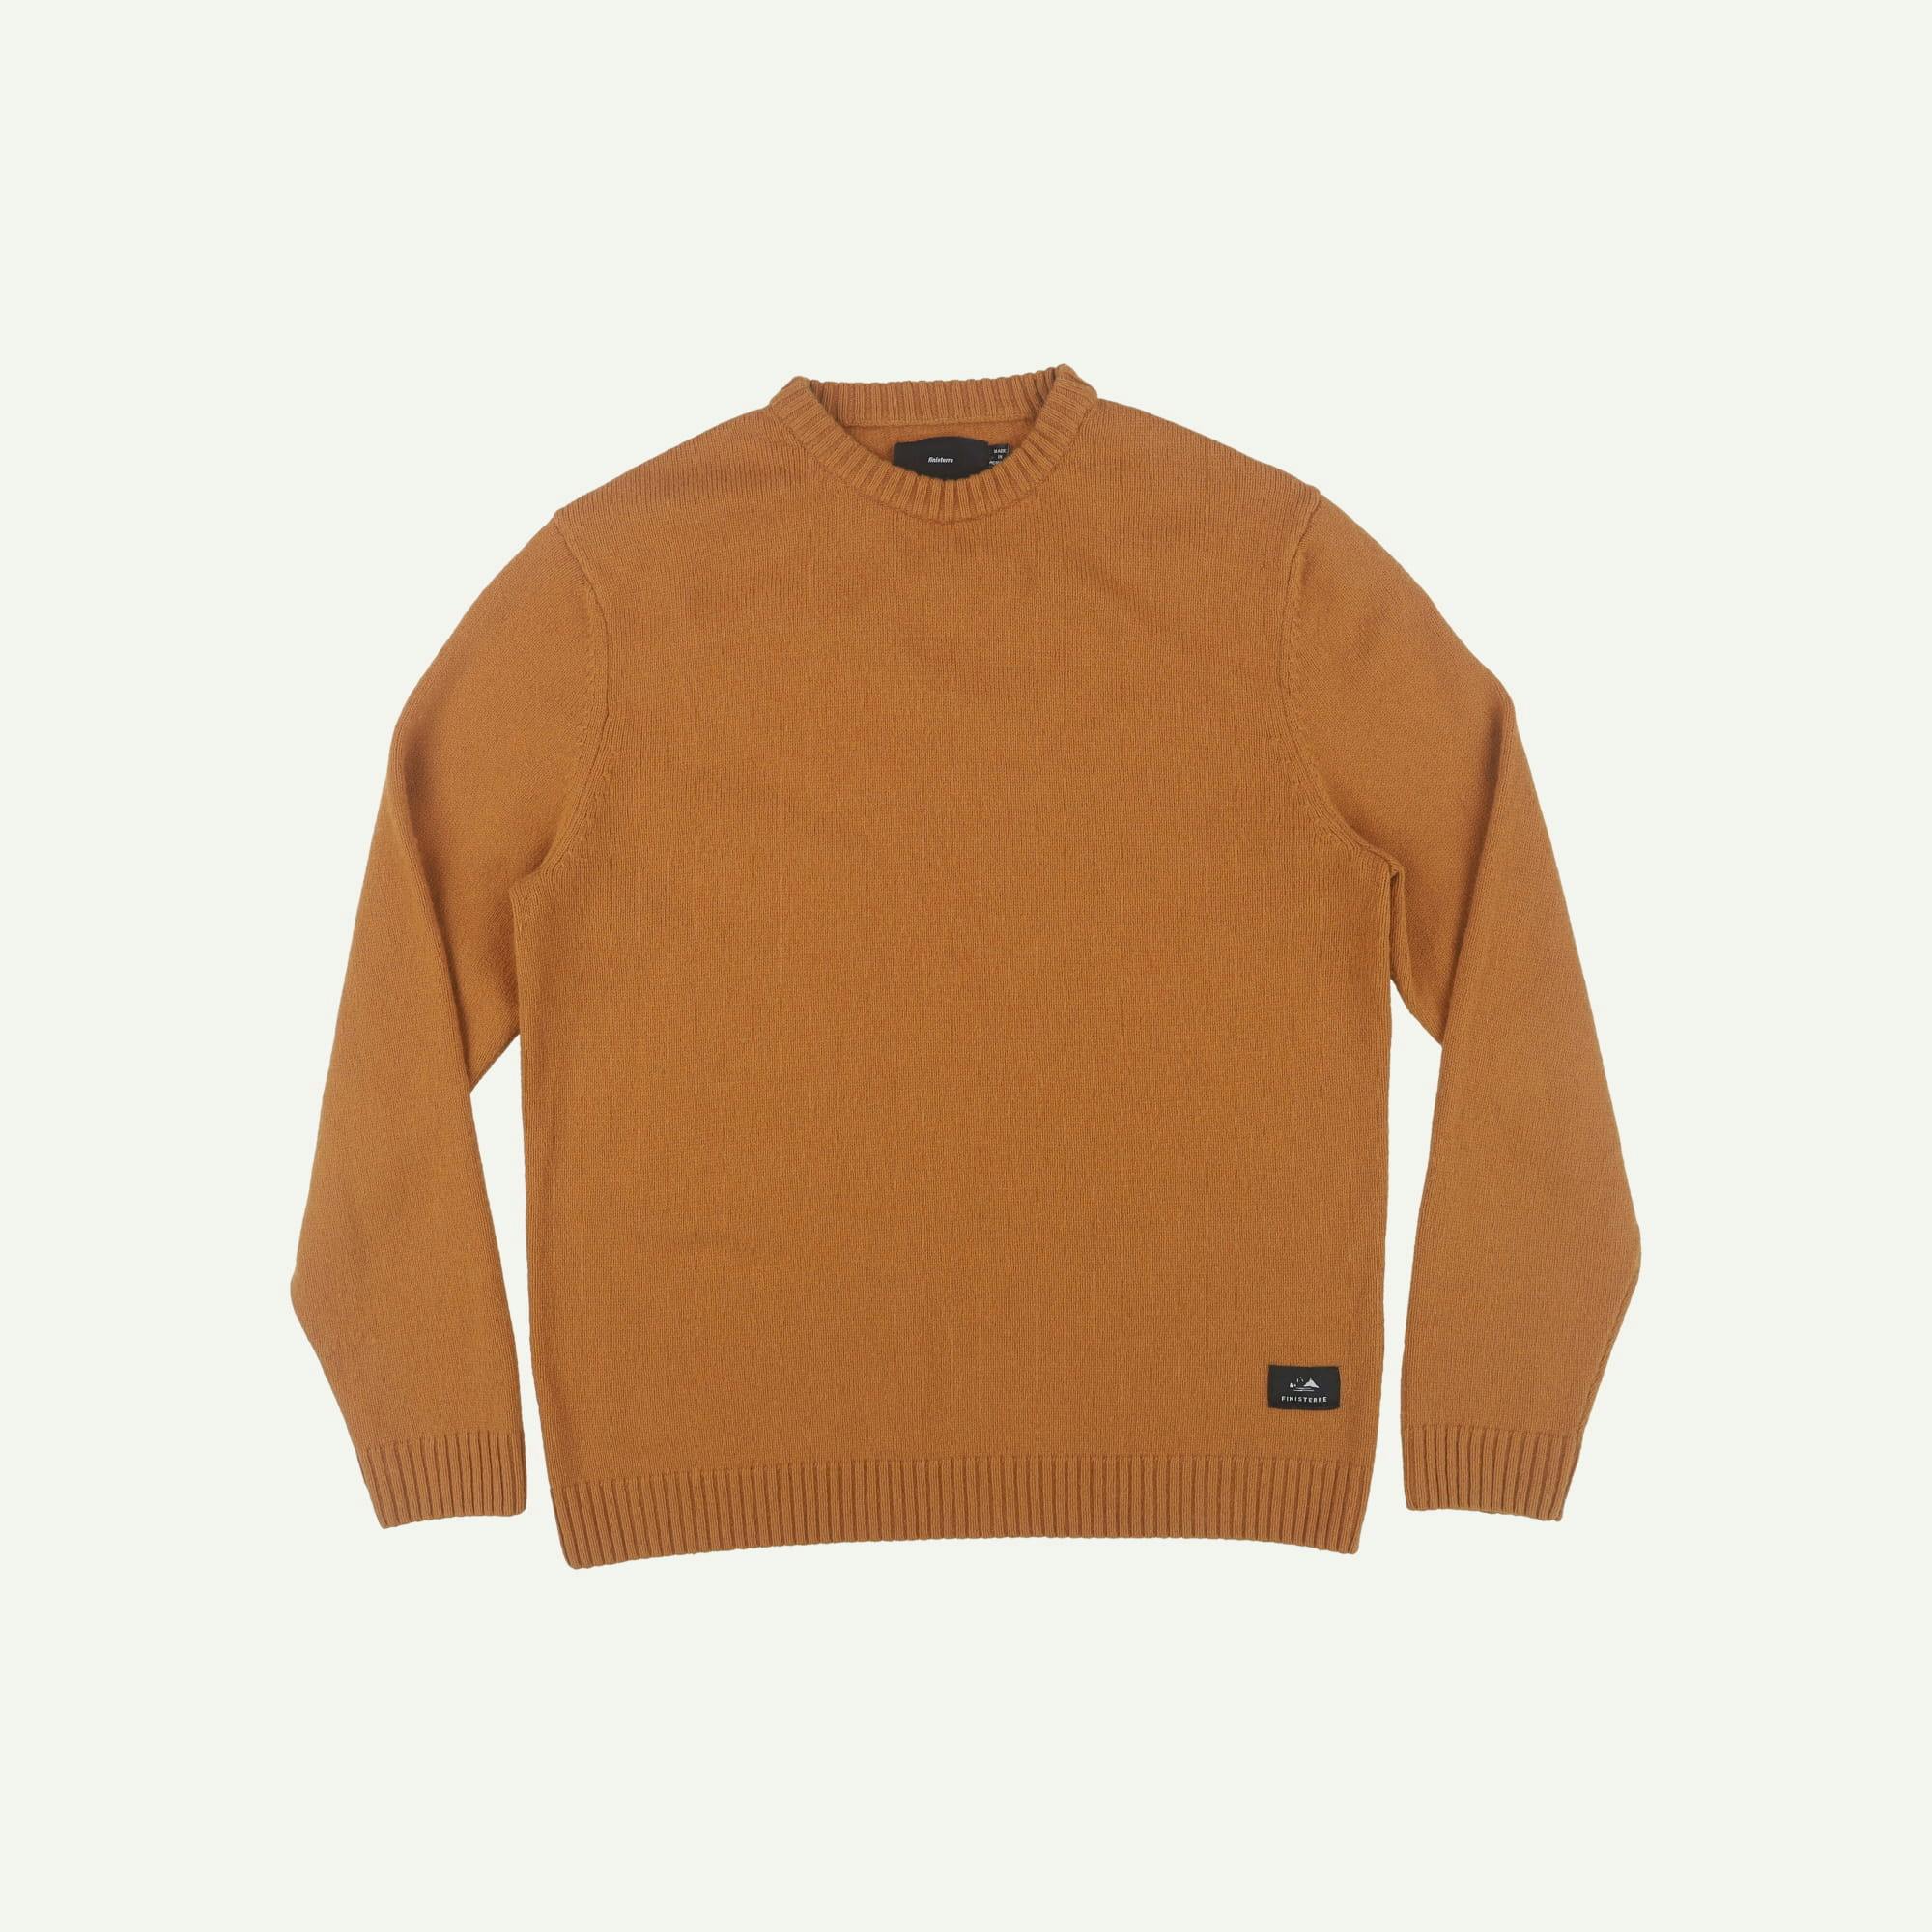 Finisterre As new Gold Columba Jumper